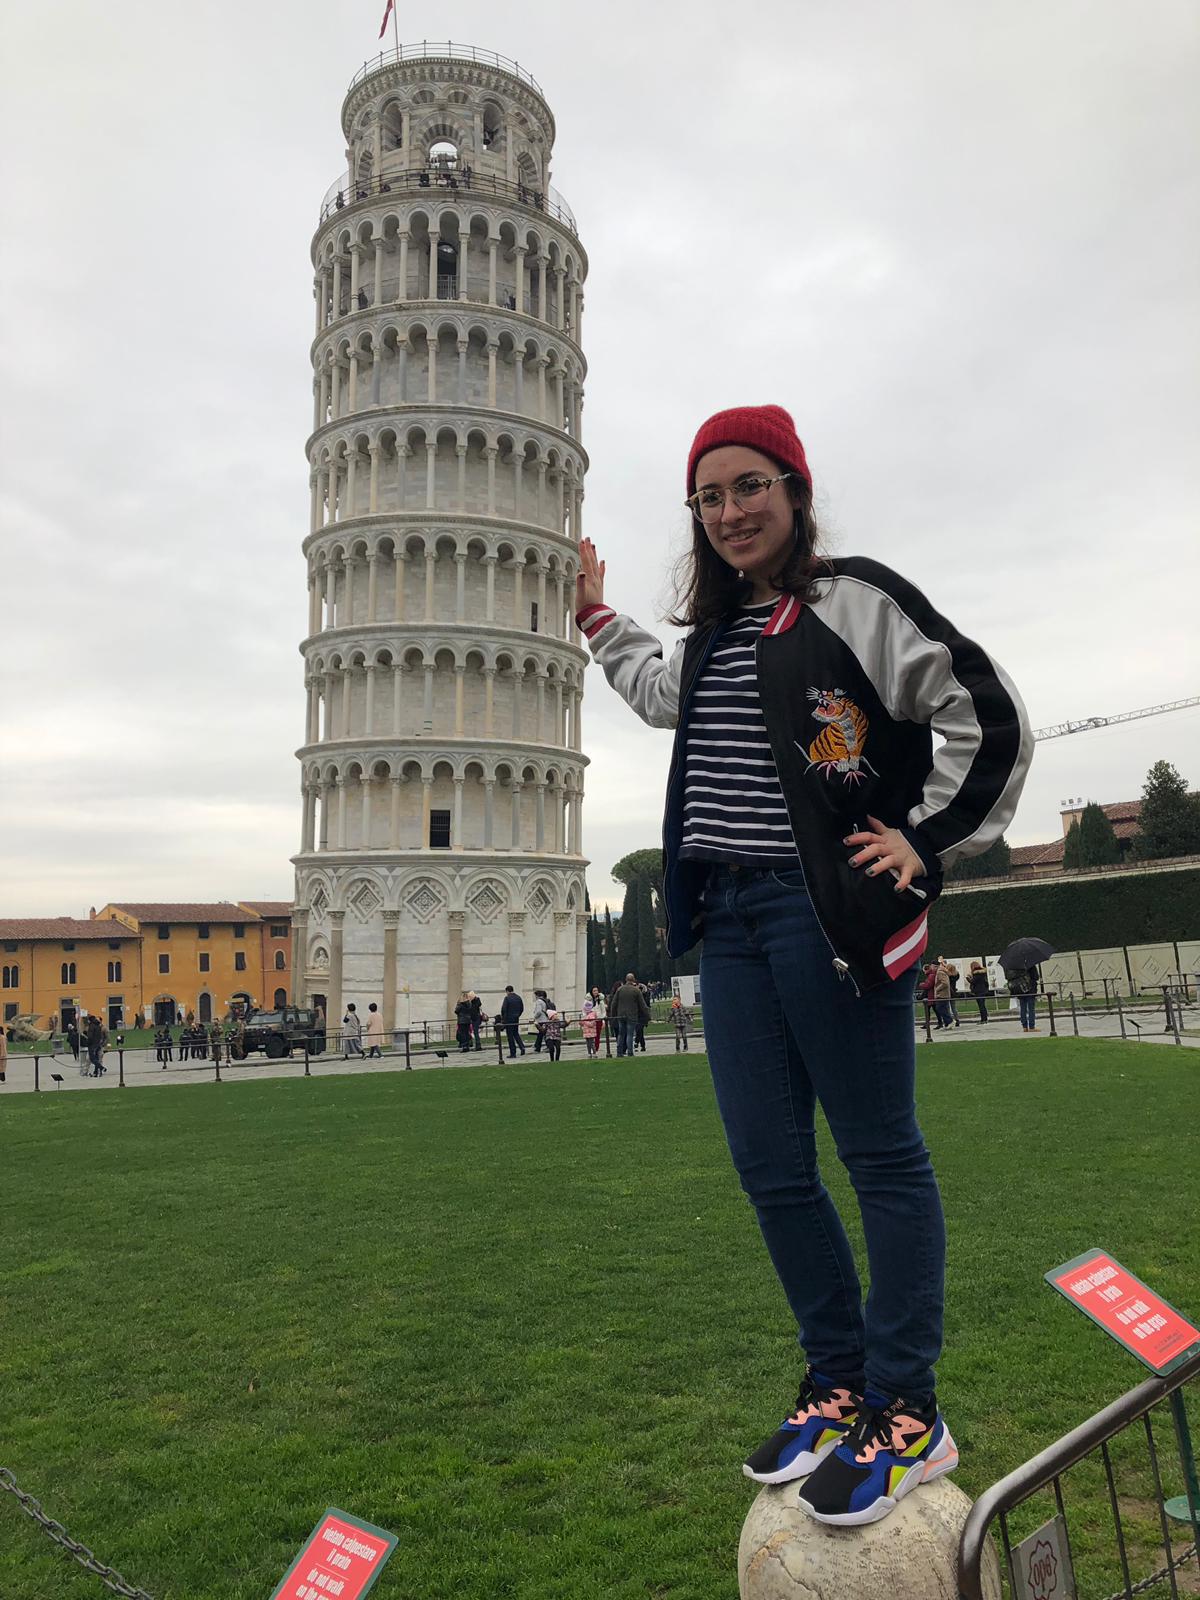 Molly posing with the Leaning Tower of Pisa